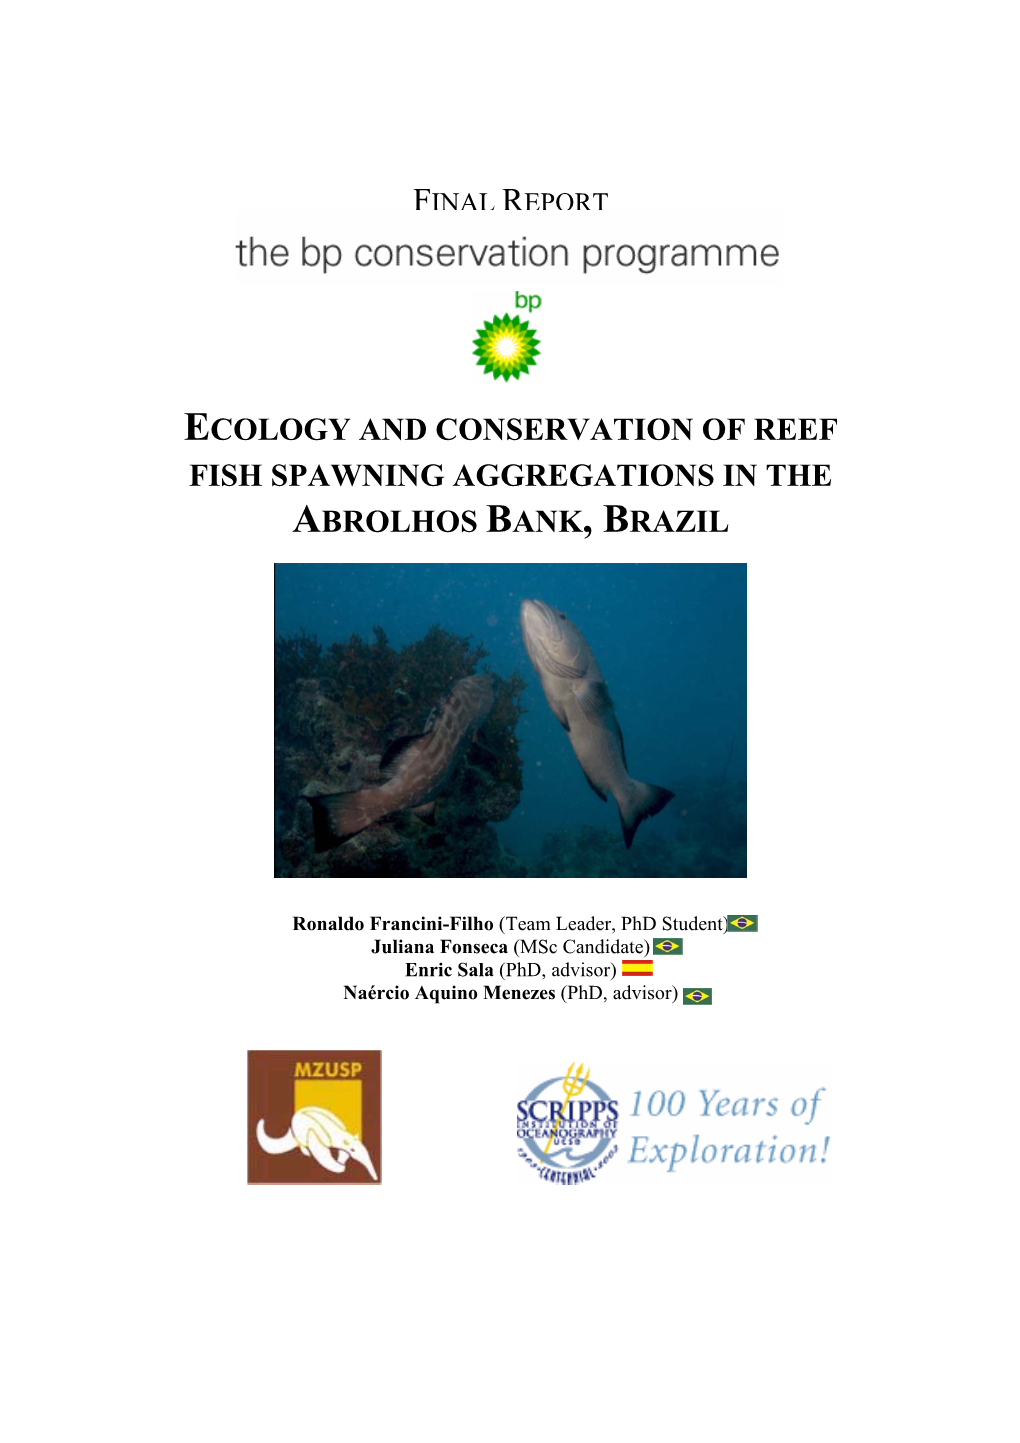 Ecology and Conservation of Reef Fish Spawning Aggregations in the Abrolhos Bank, Brazil